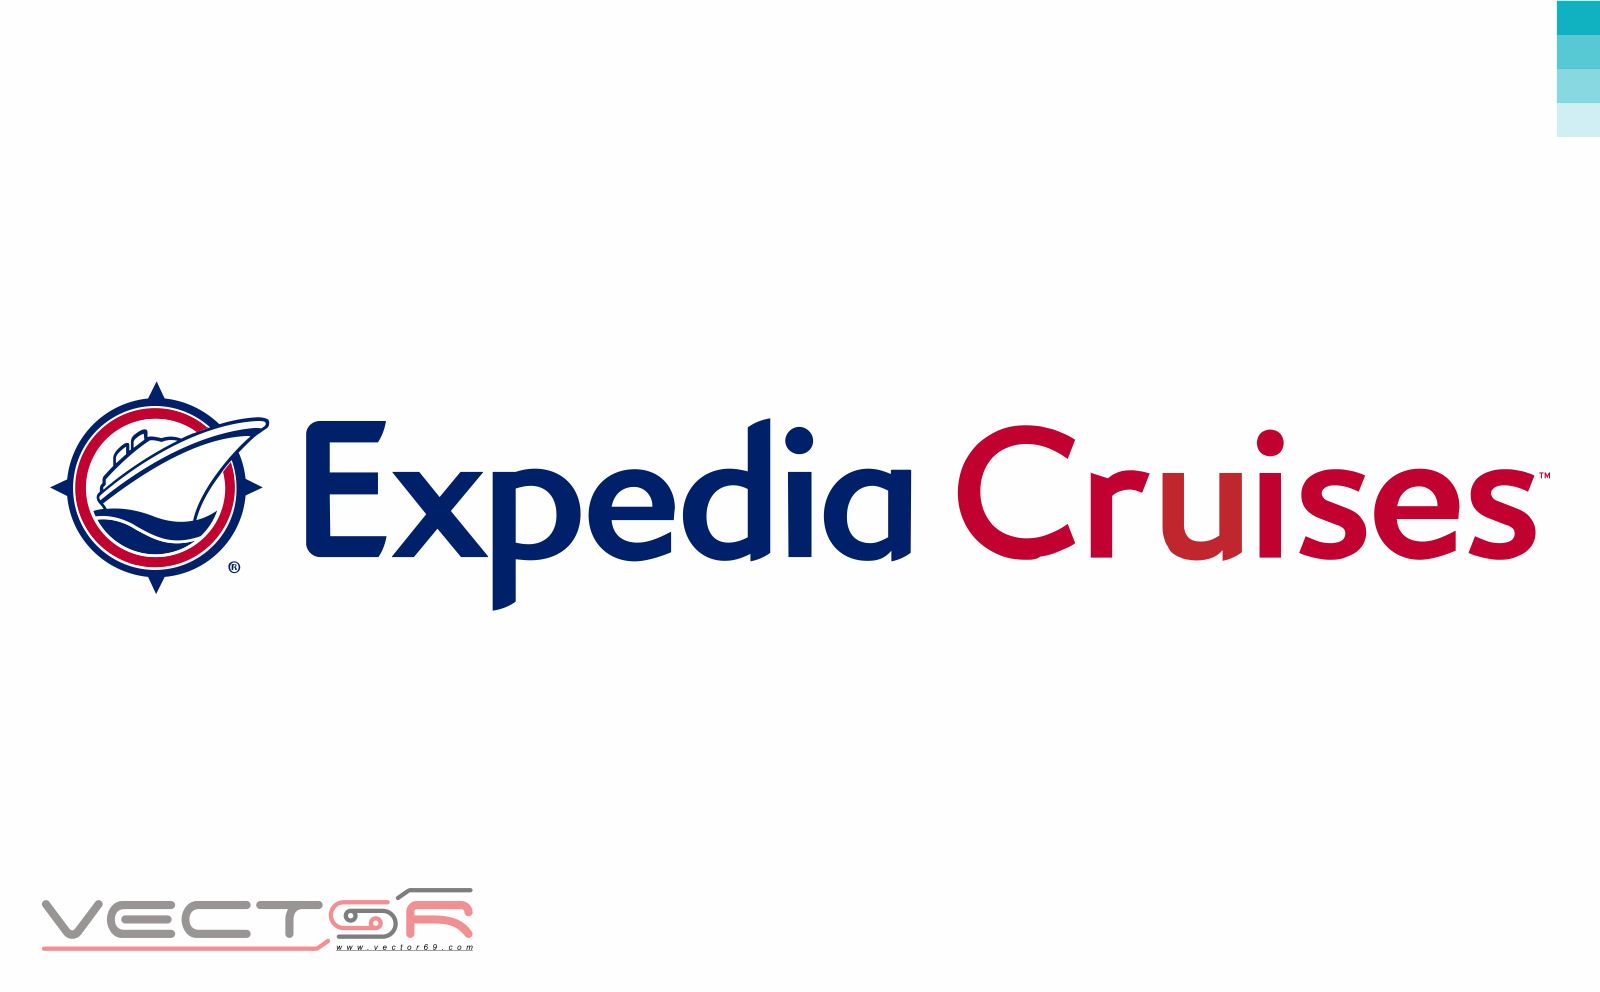 Expedia Cruises Logo - Download Vector File SVG (Scalable Vector Graphics)